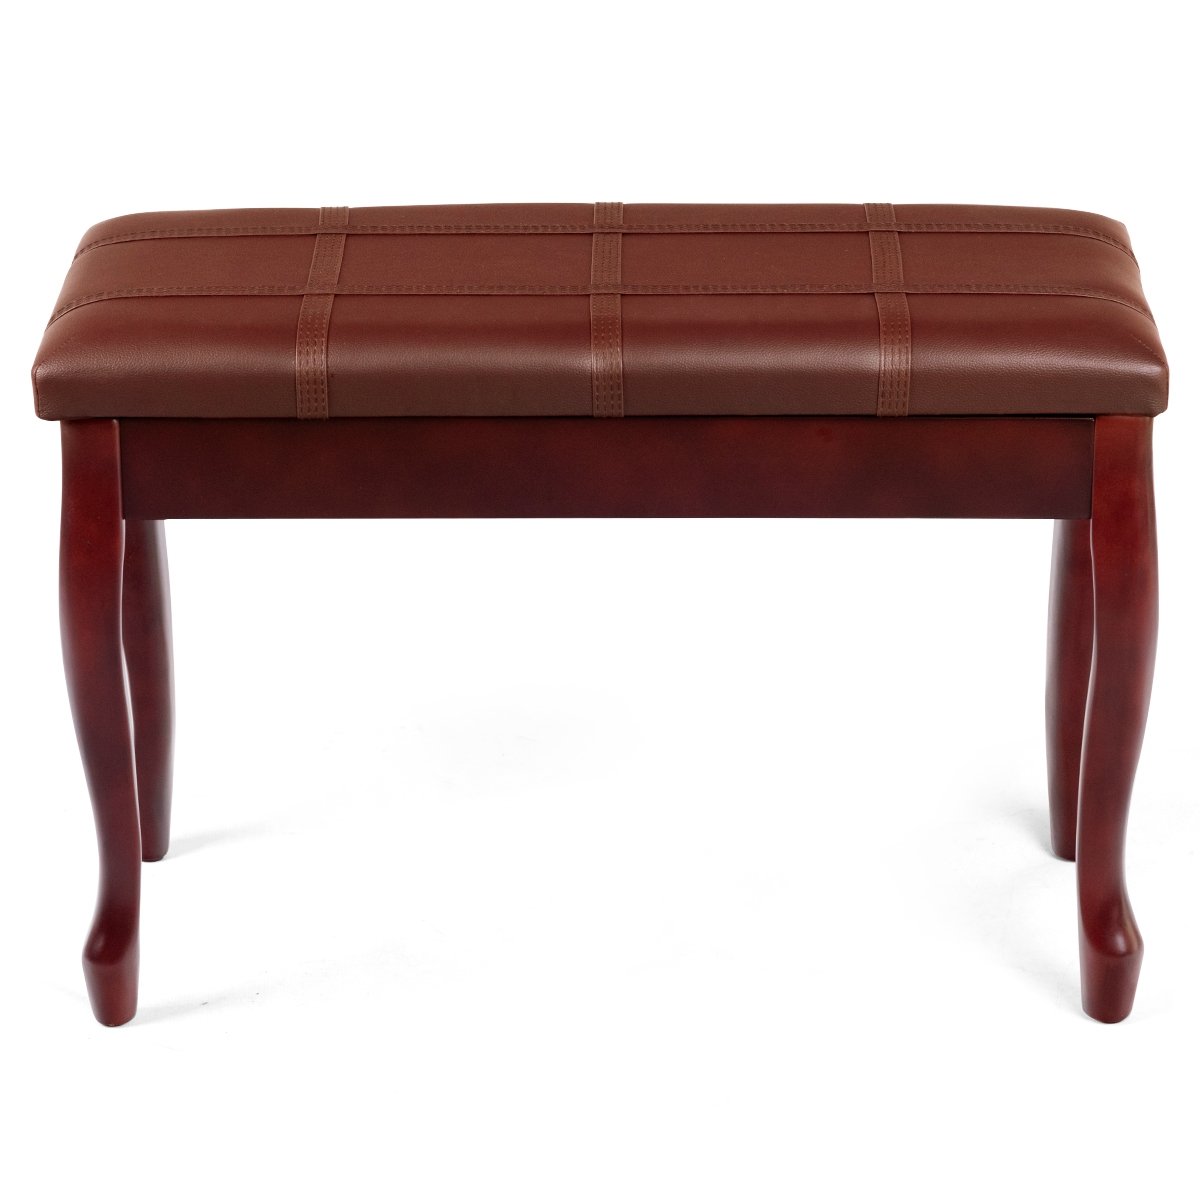 Solid Wood PU Leather Piano Bench with Storage, Brown at Gallery Canada